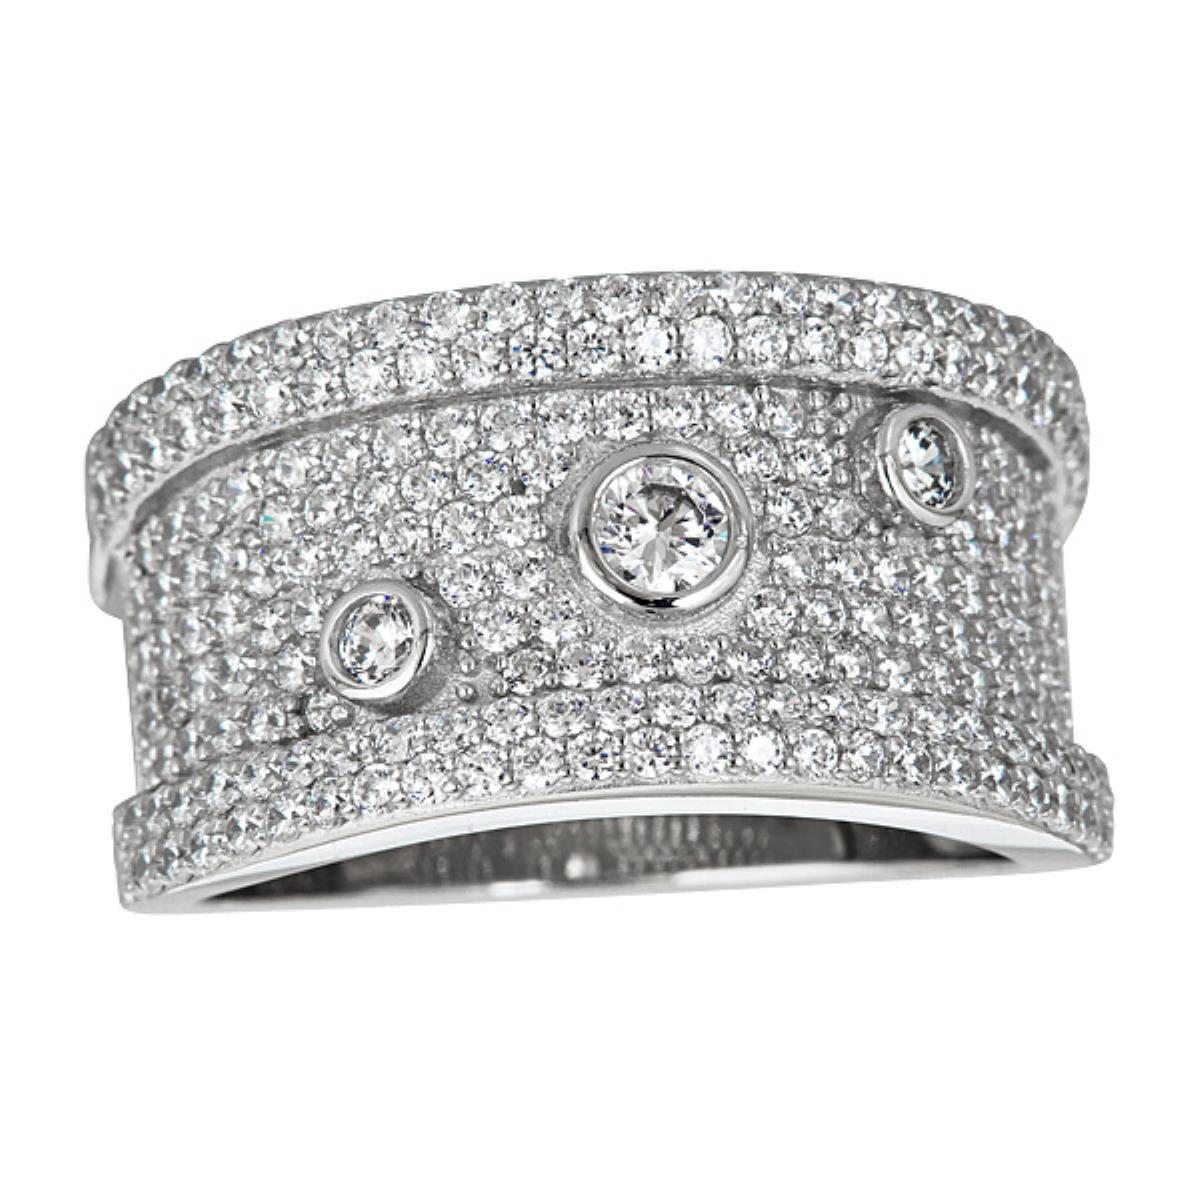 Sterling Silver Micropave Floating Bezel Fash Ring